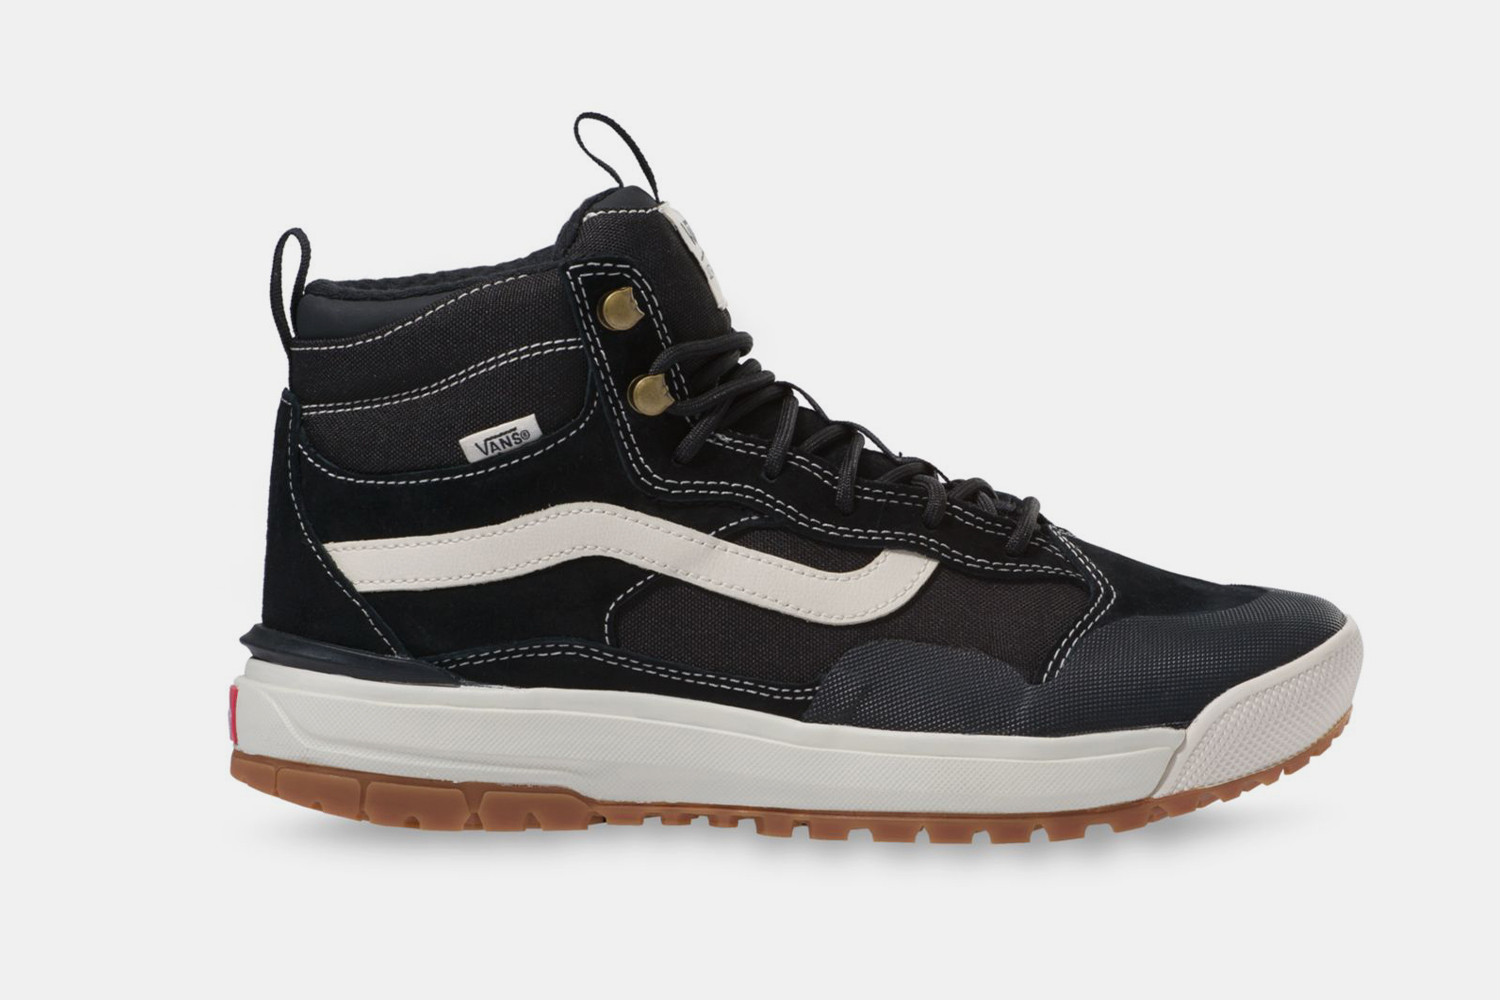 Boots Sneaker Deal: Are Off Vans These InsideHook - $20